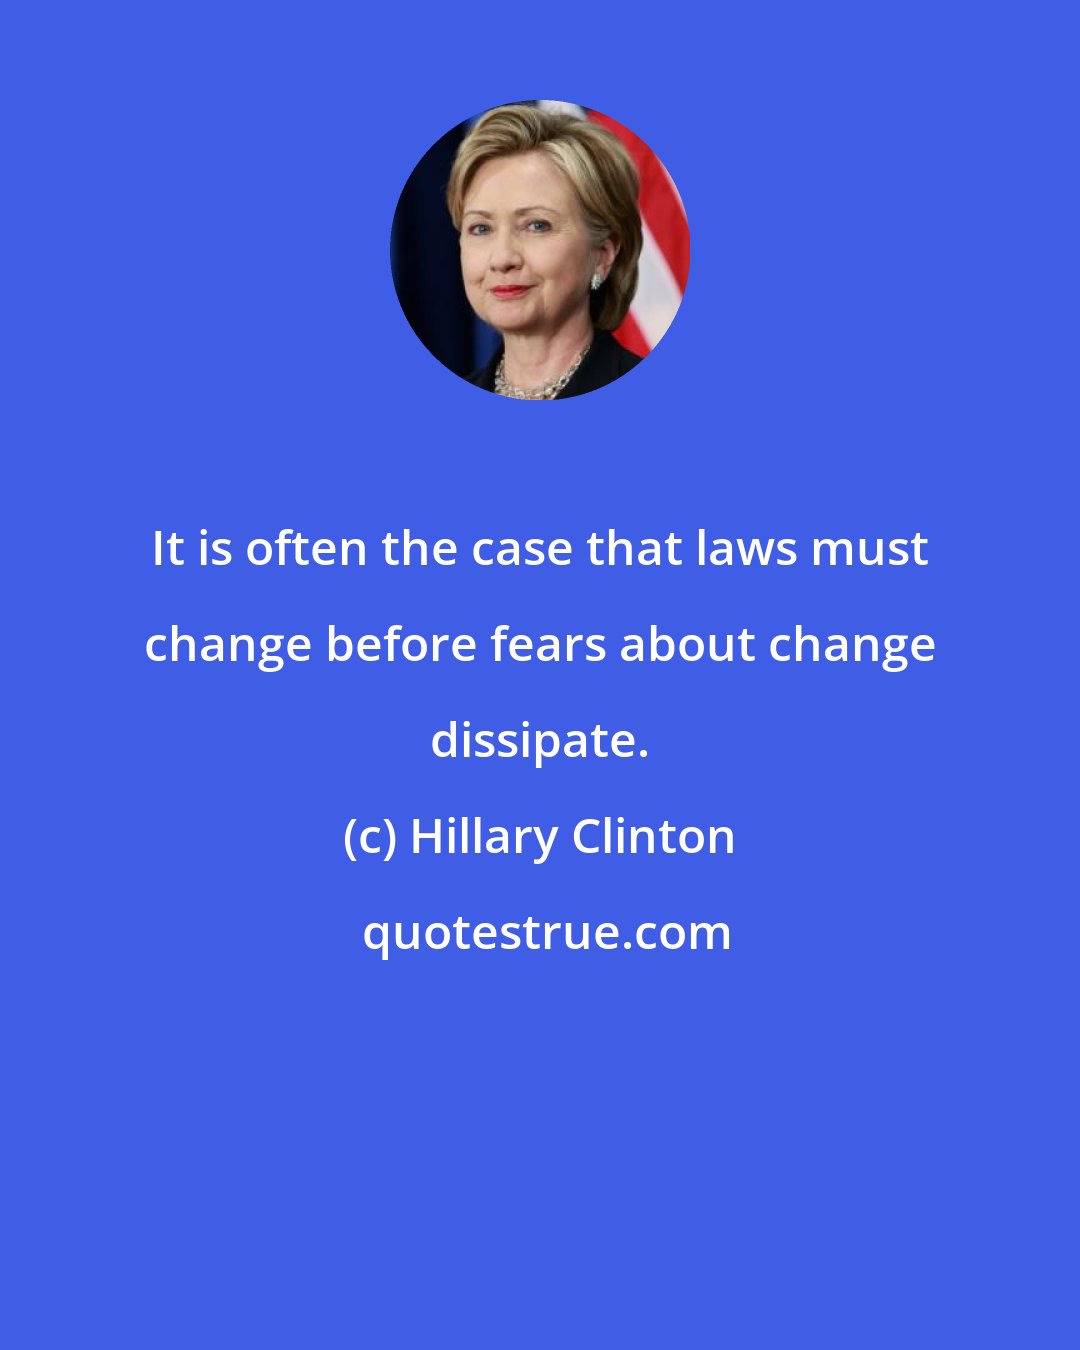 Hillary Clinton: It is often the case that laws must change before fears about change dissipate.